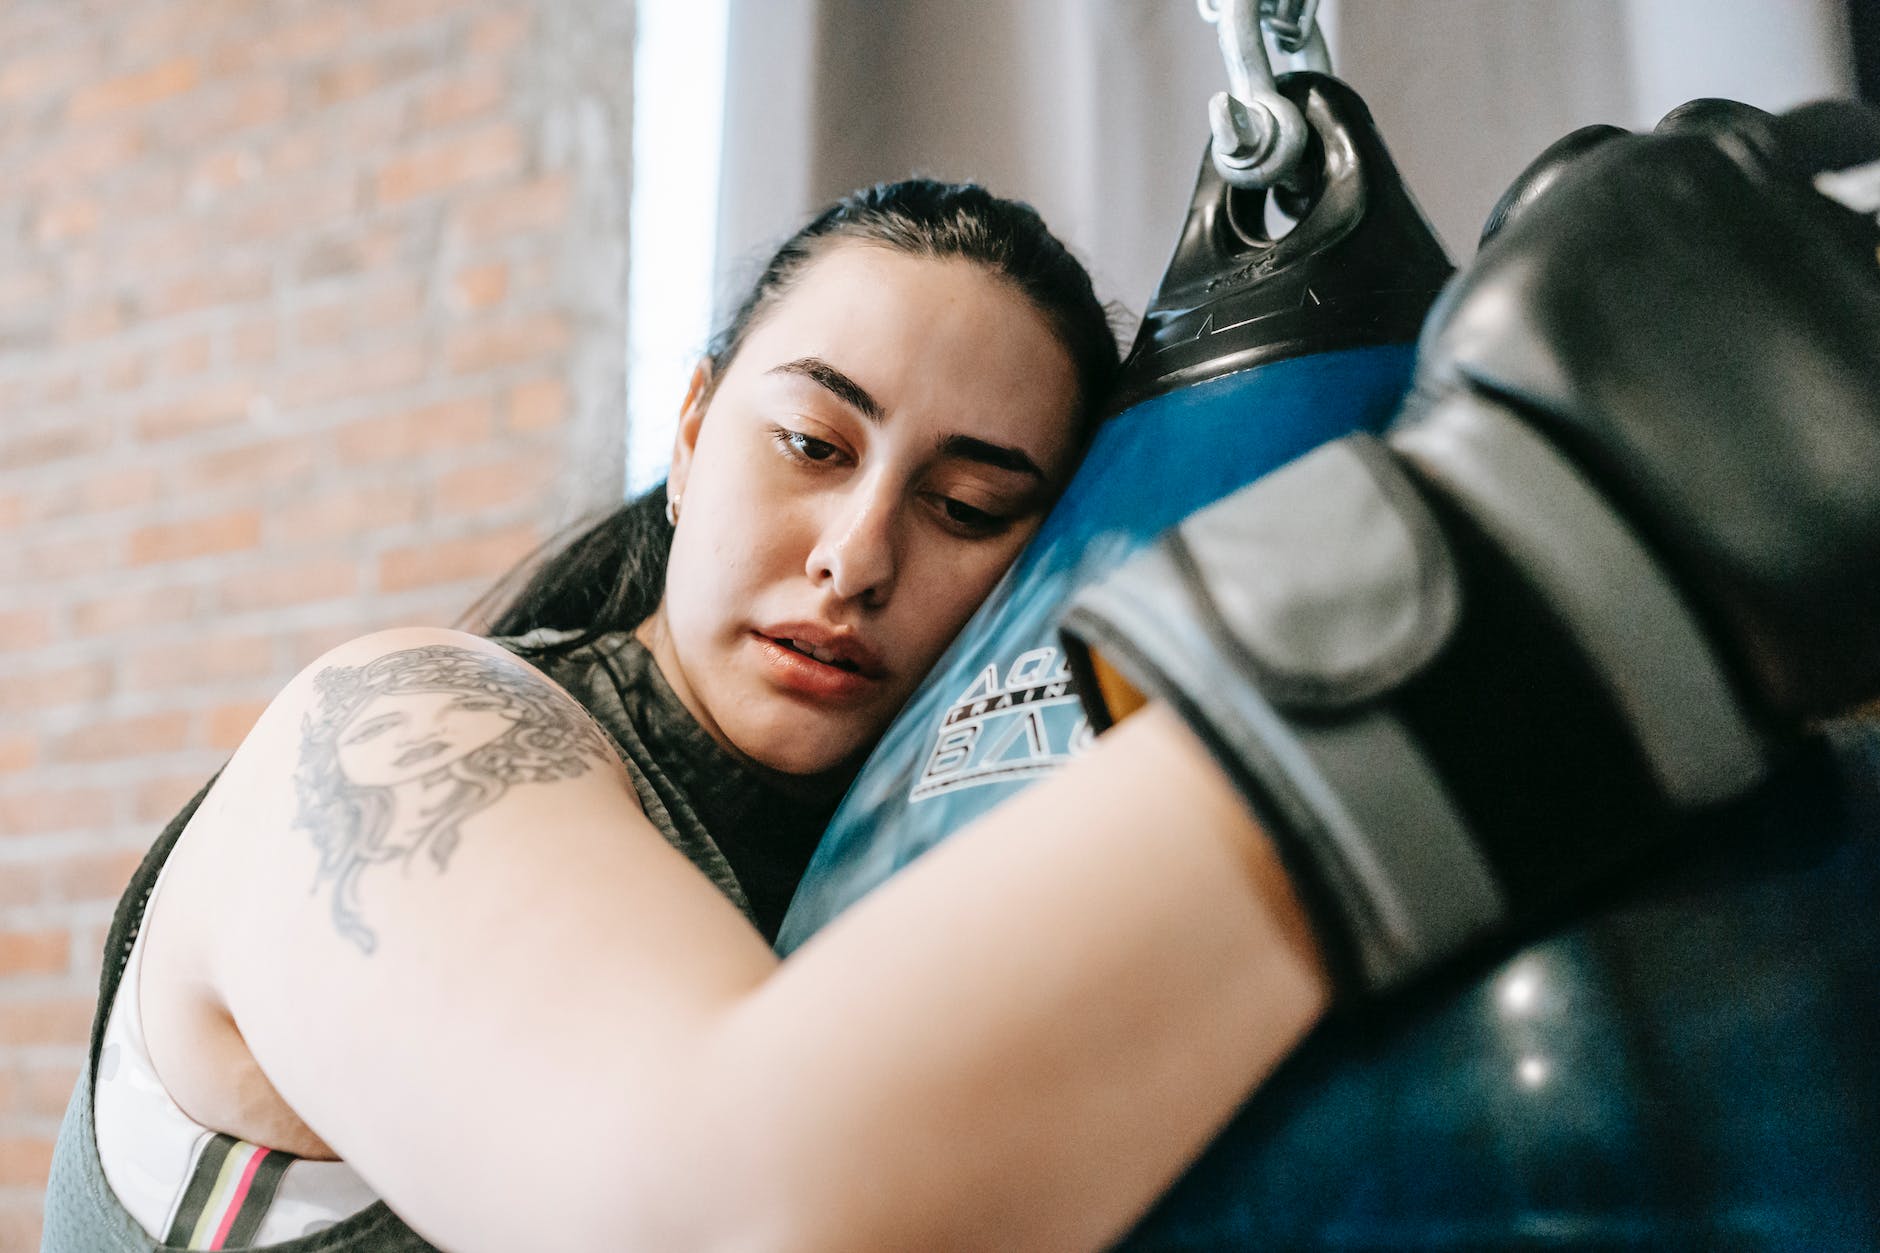 weary woman embracing punching bag after hard training